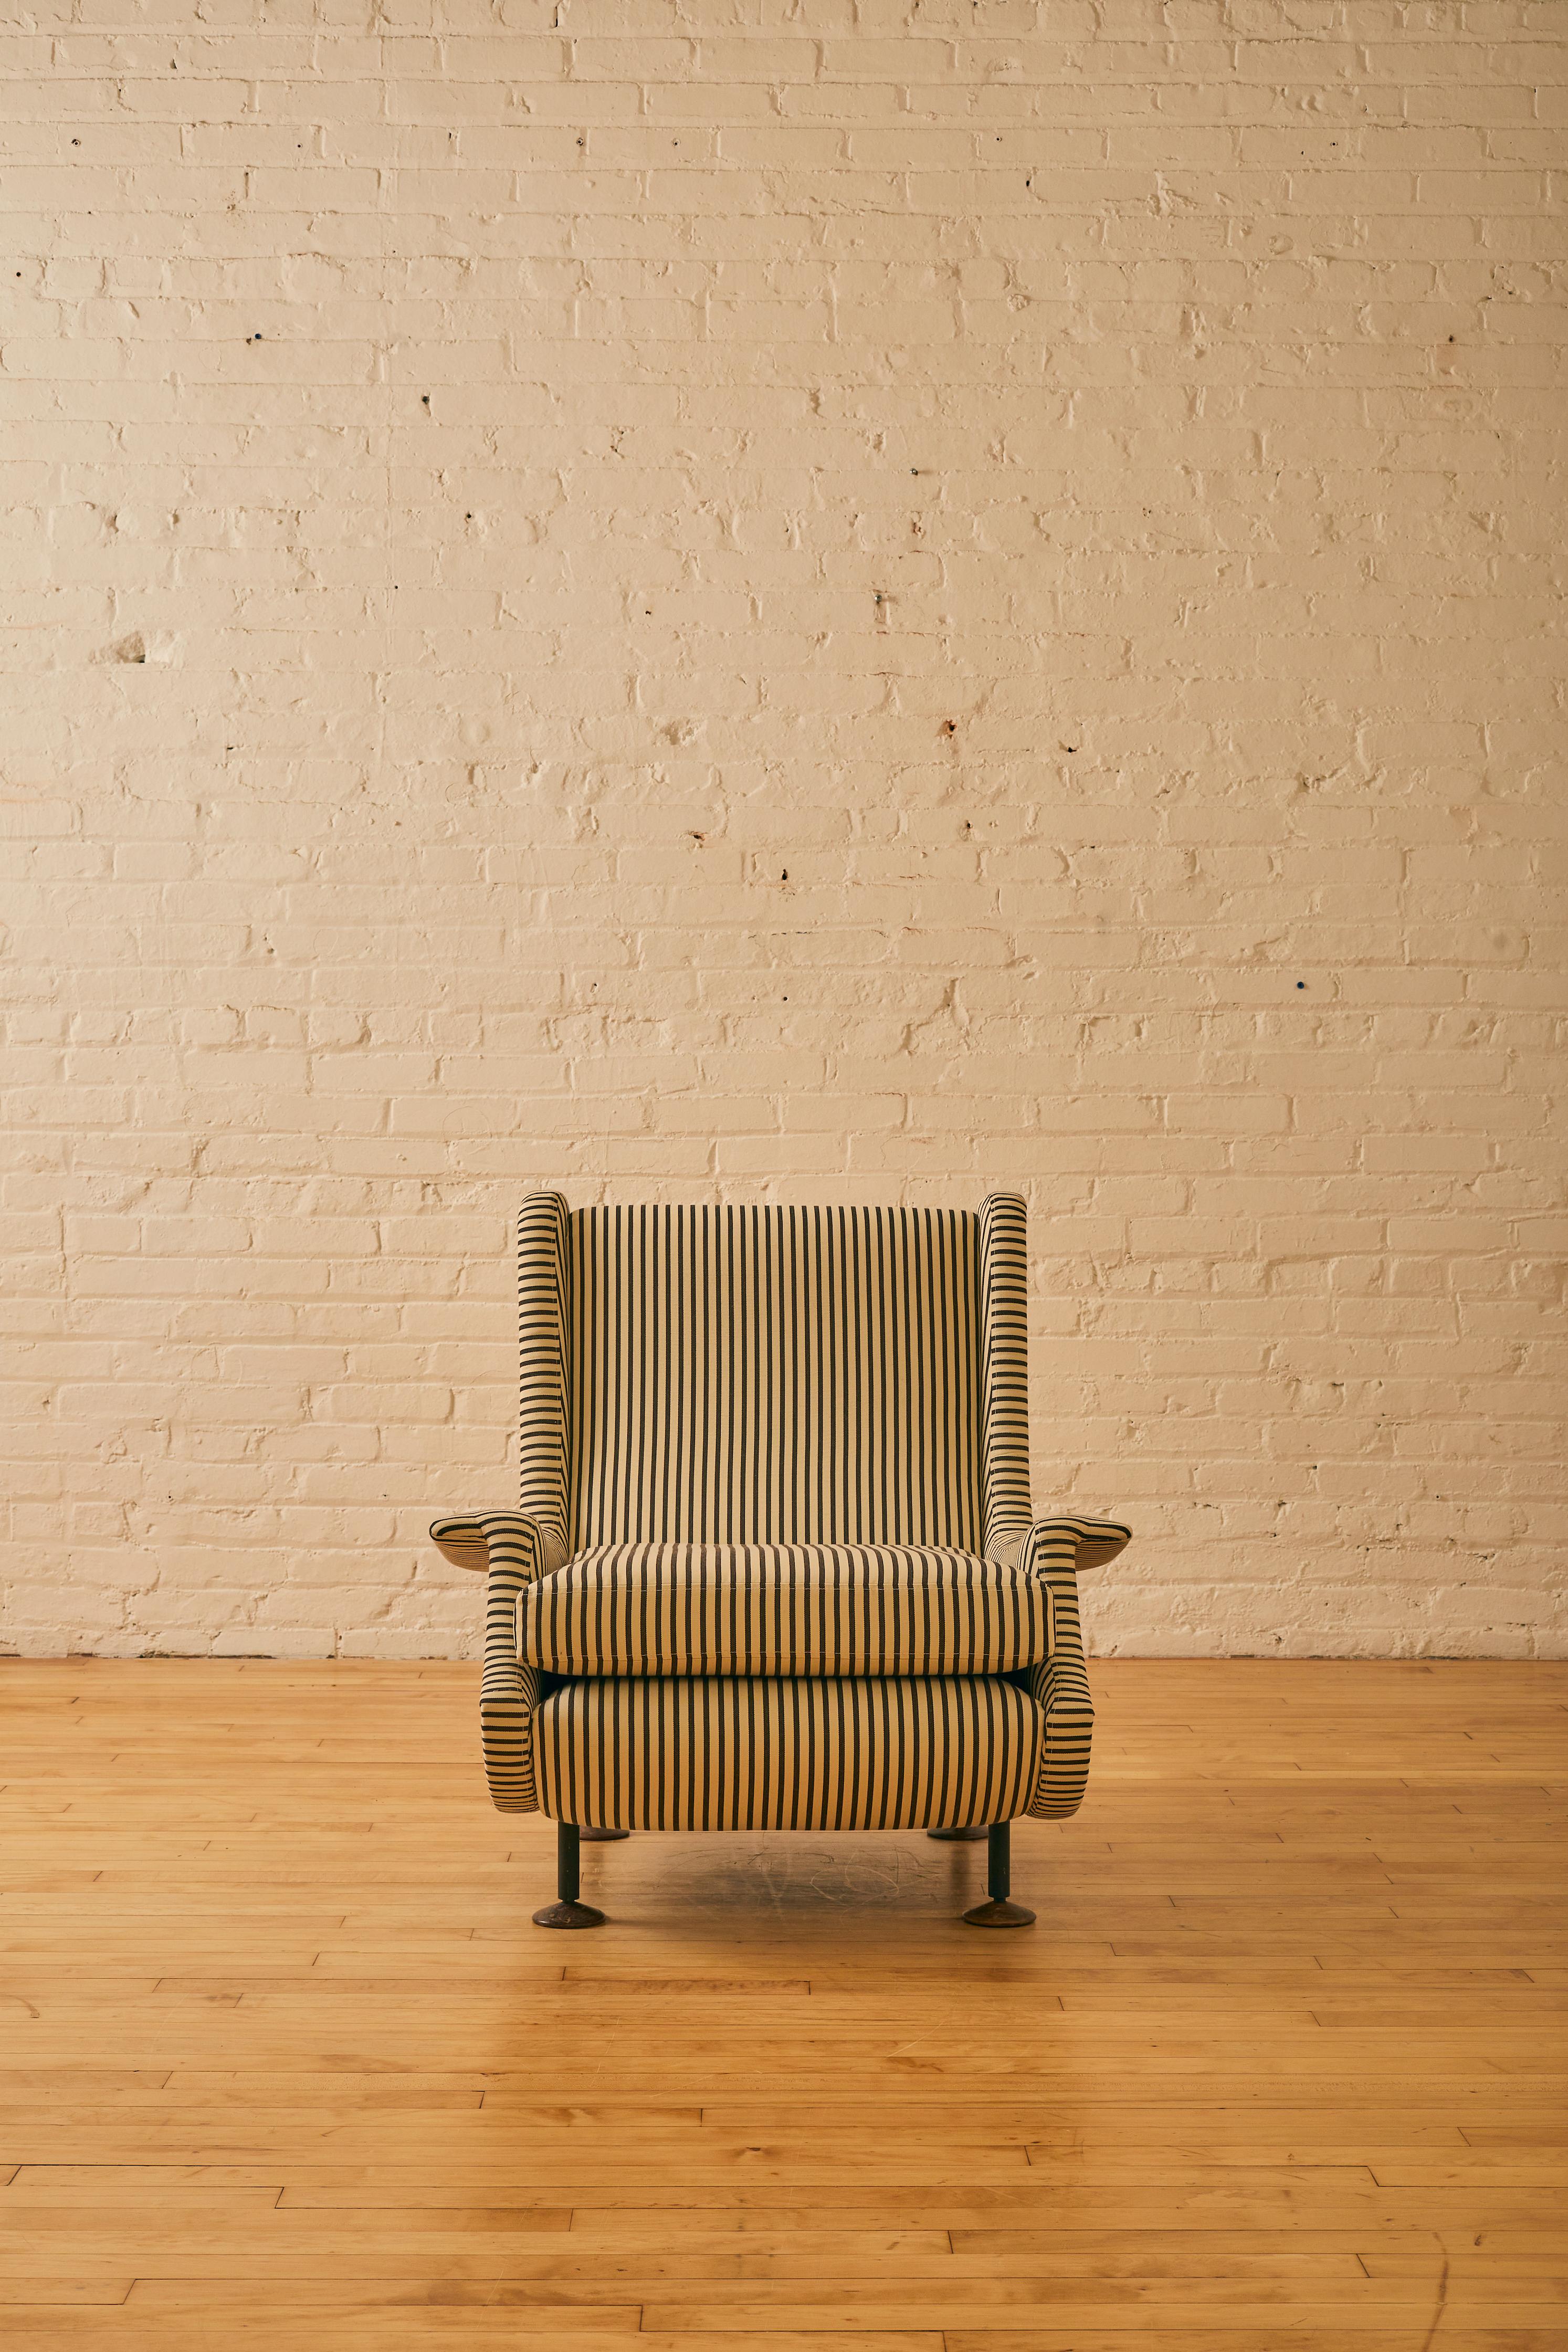 Regent Armchair by Marco Zanuso reupholstered with Dedar Milano's Strange Loves indoor/outdoor cotton twill stripe.